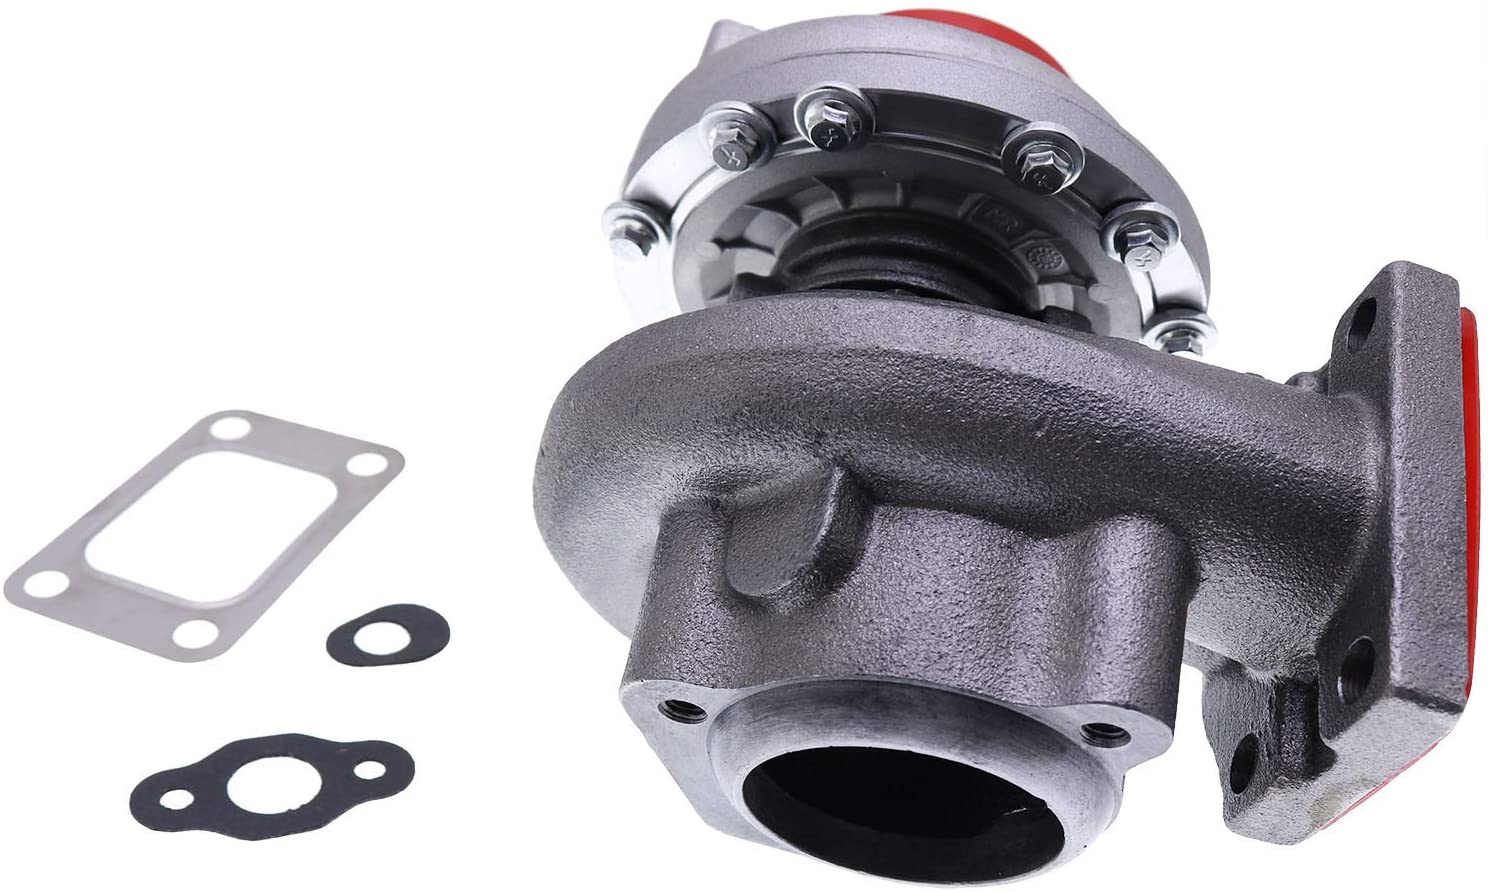 Turbocharger GT2052S 2674A324 2674A382 727265-0002 727265-5002S for Perkins Engine T4.40 - KUDUPARTS